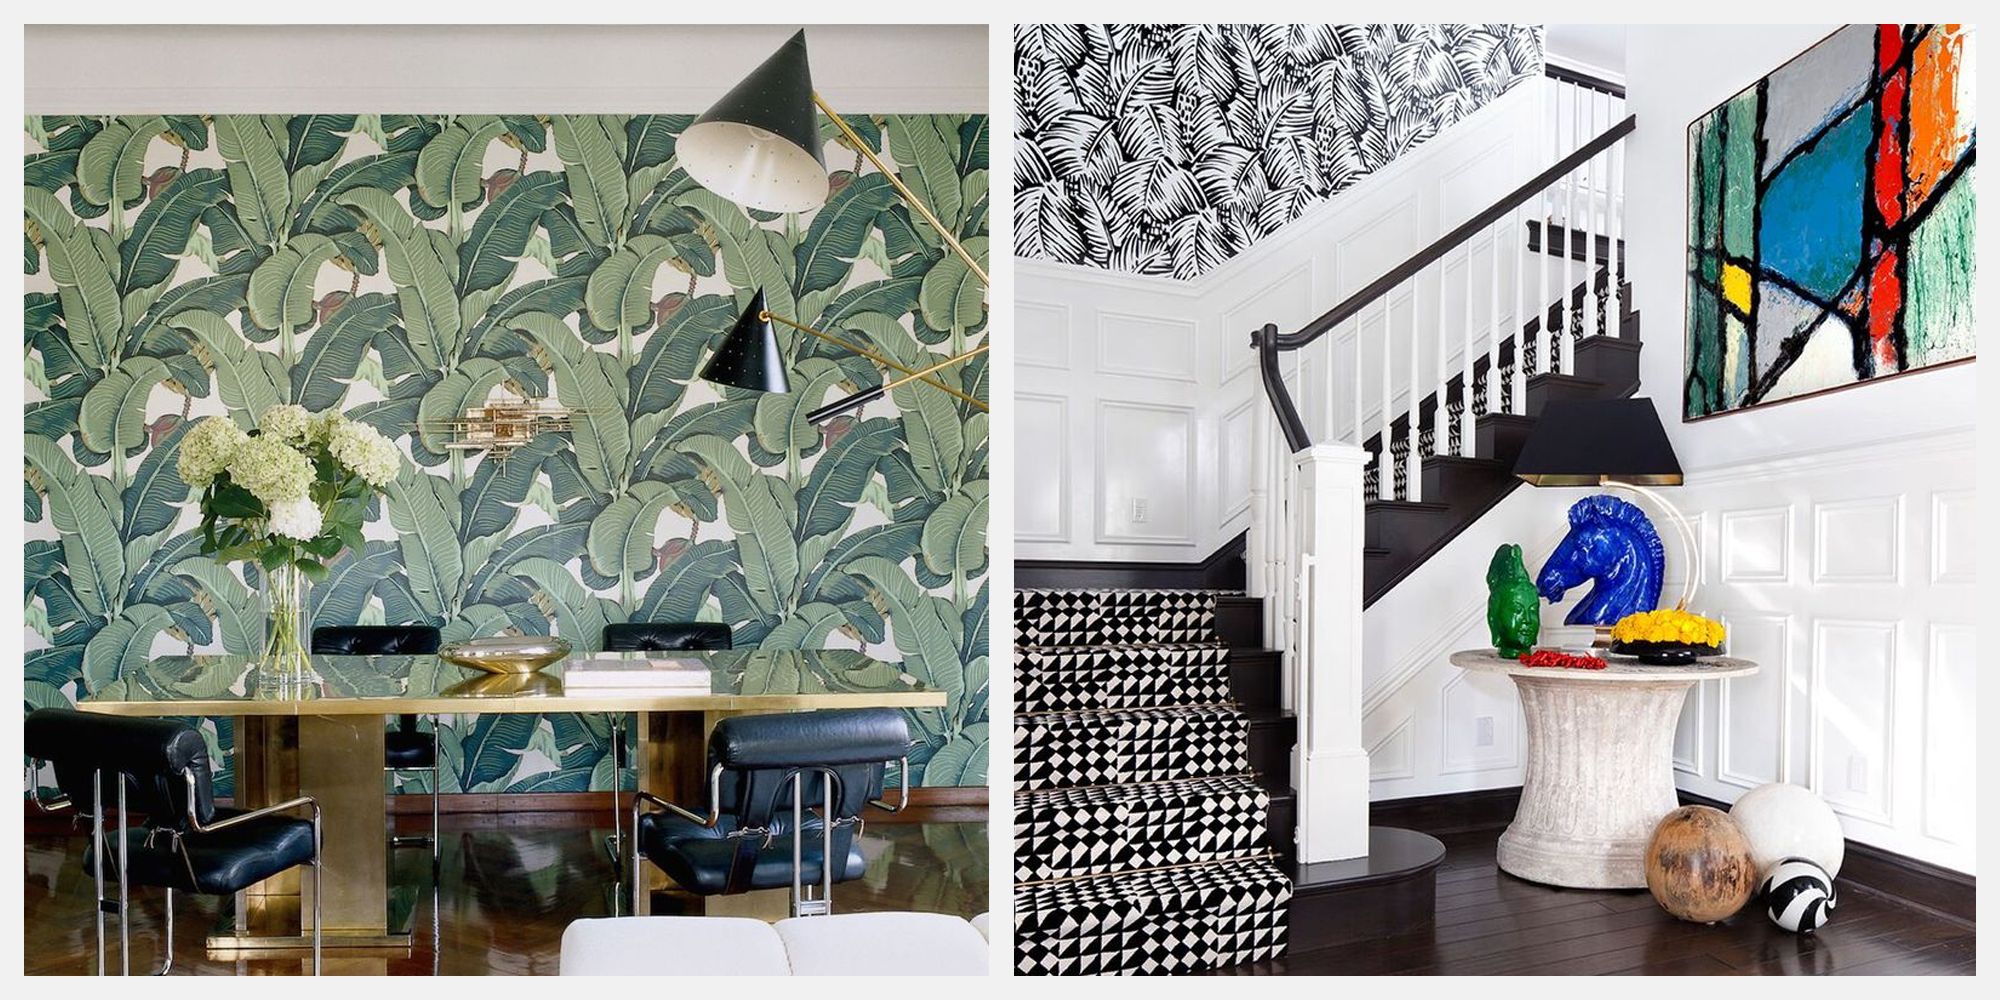 Top Interior Design Trends 2019 - What Decorating Styles Are In & Out